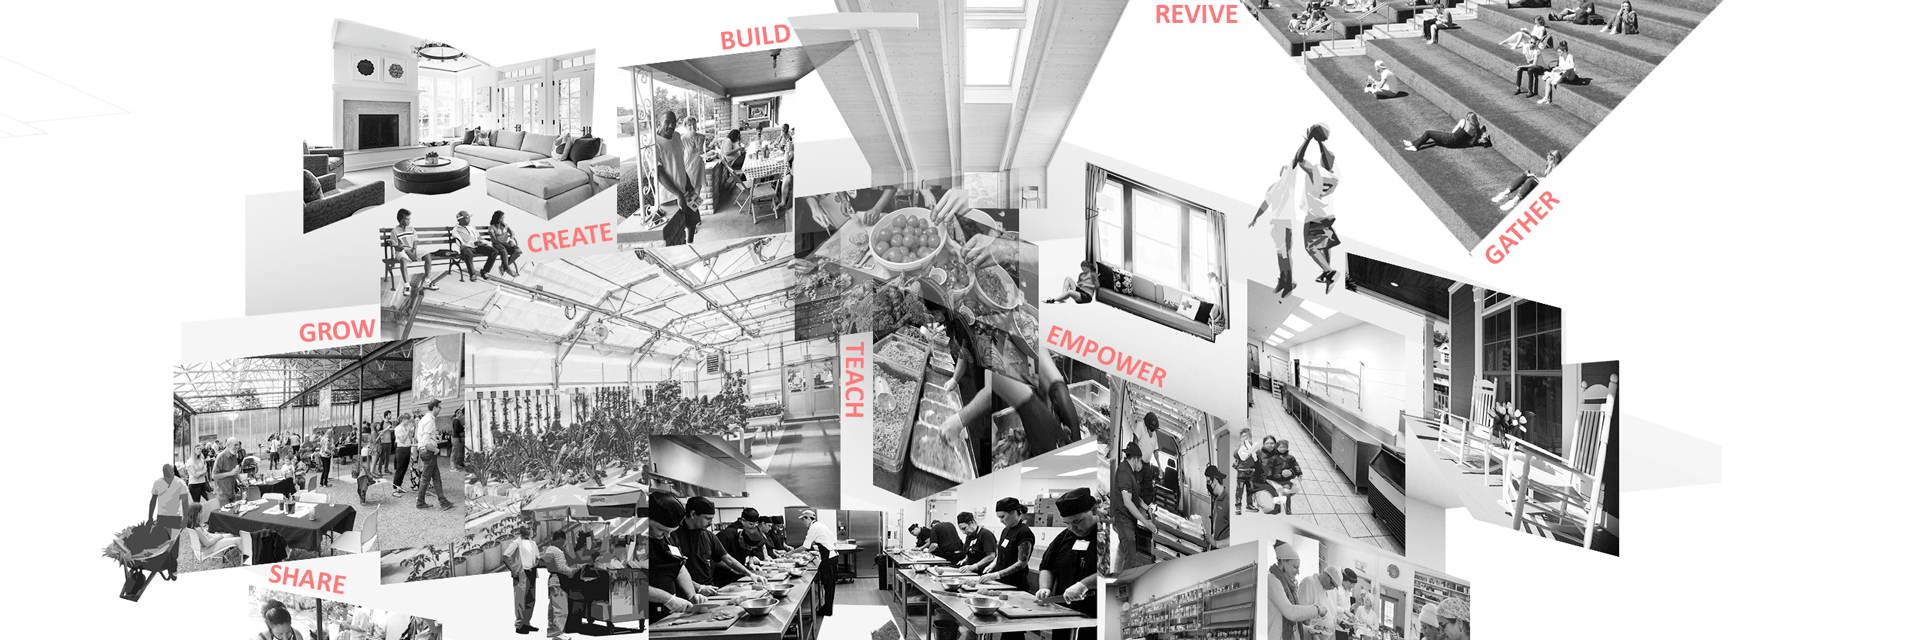 Collage showing people in work, leisure, and education activities